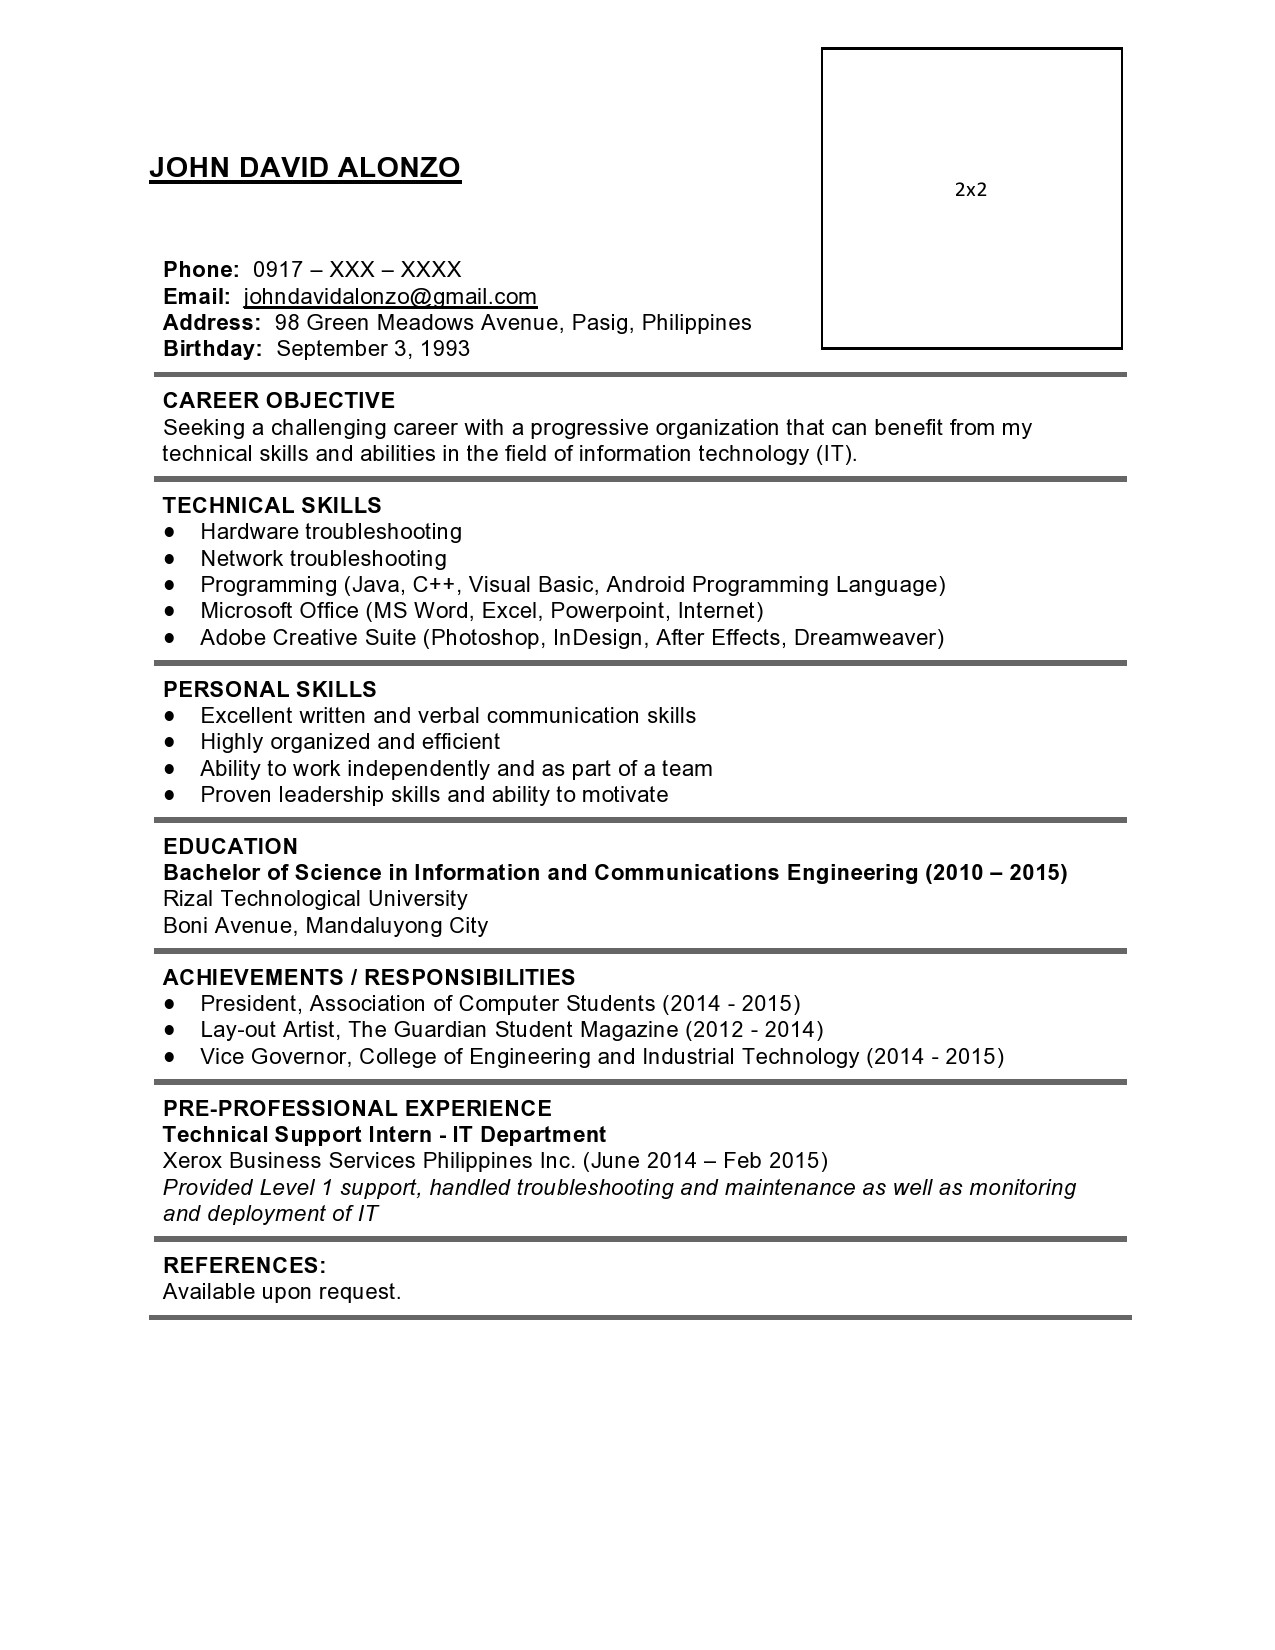 Sample Resume after First Job Out Of College Sample Resume formats for Fresh Graduates